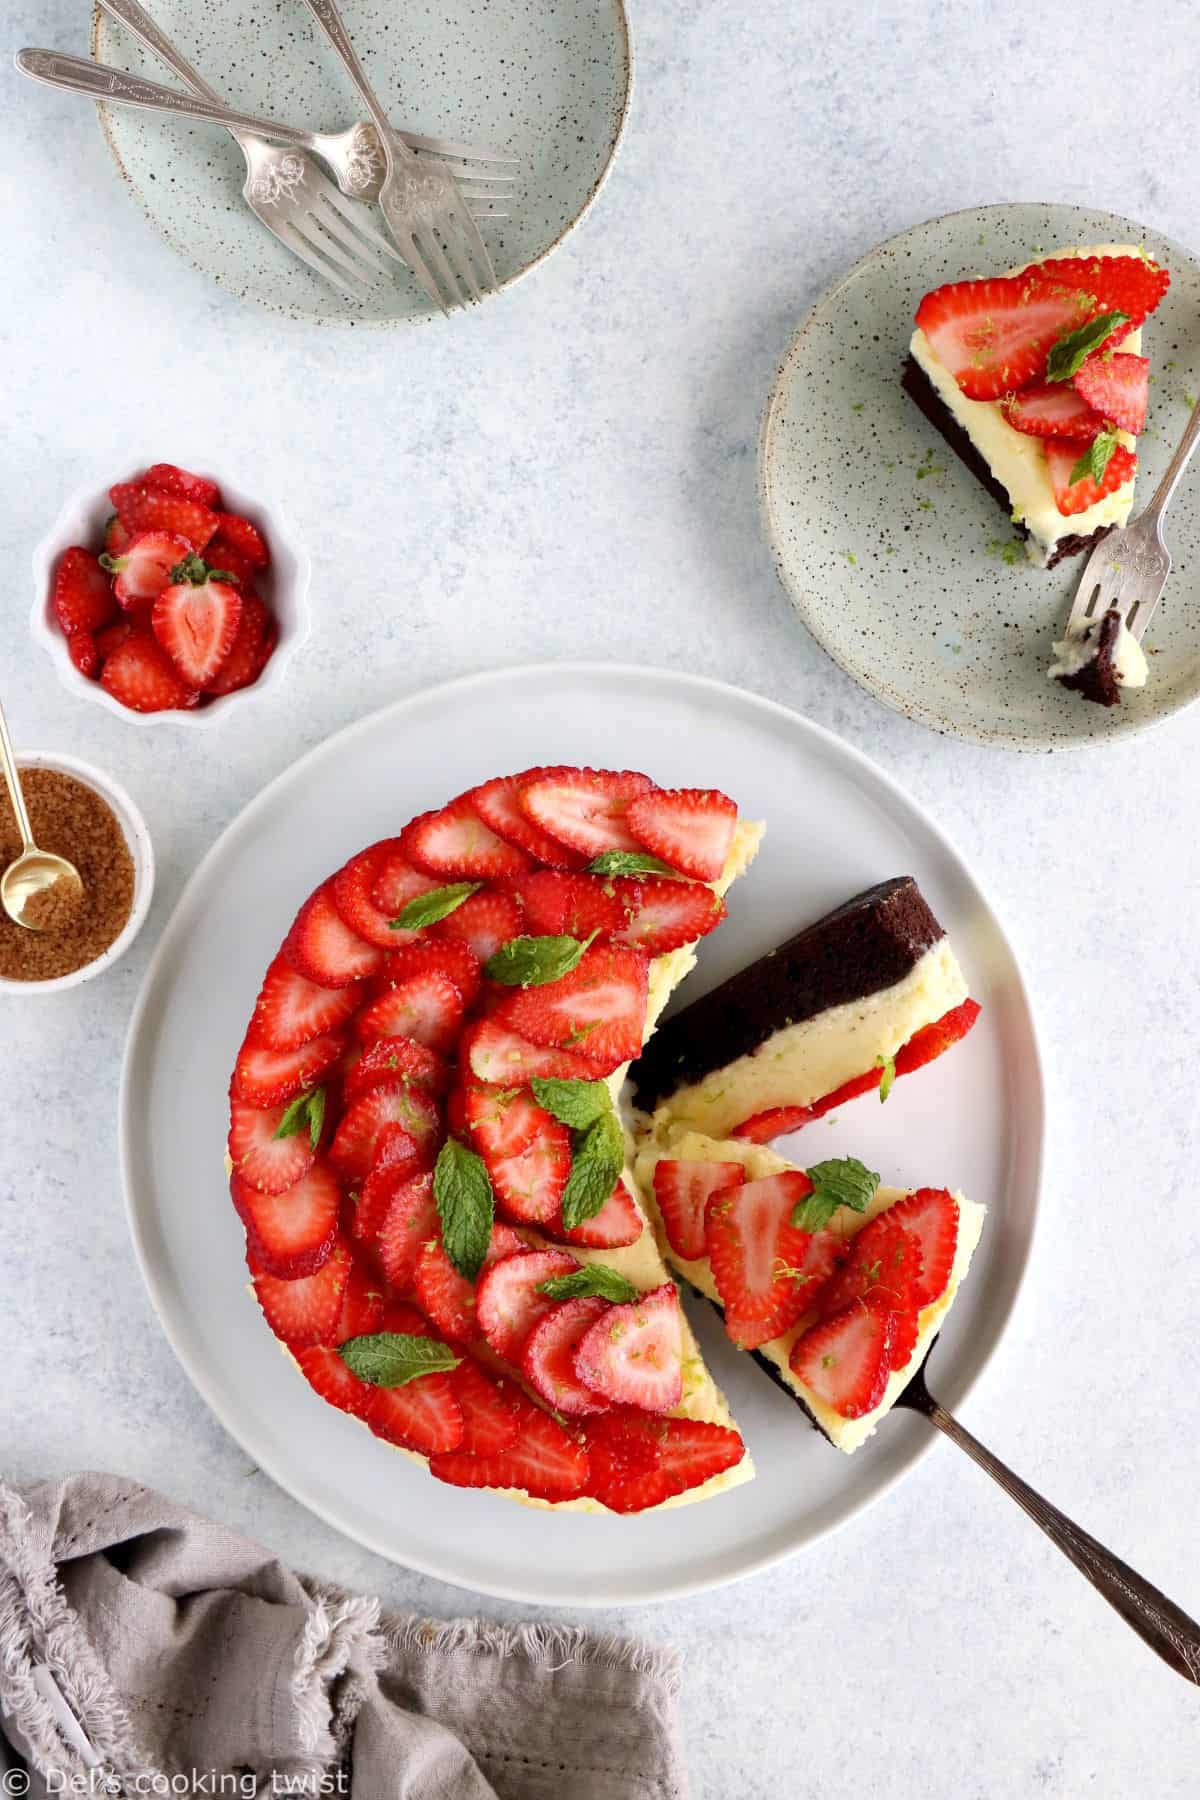 This strawberry white chocolate cheesecake brownies features a rich chocolate base, a creamy white chocolate center, and some fresh berries.